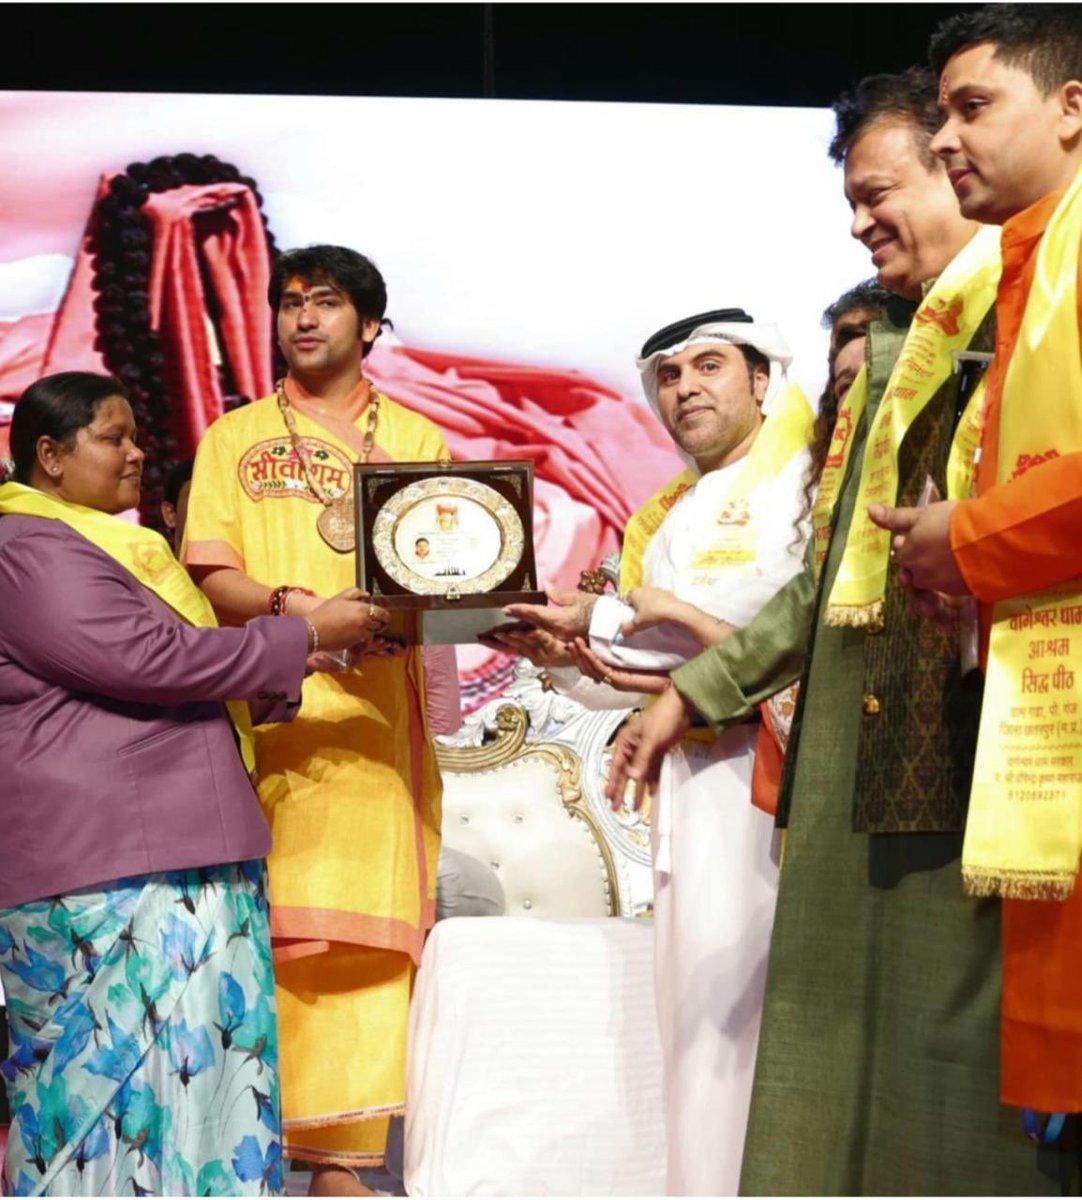 Dr. Bu Abdullah handed over the UAE Harmony Award to Guruji Bageshwar Dham for Unity through Diversity at the 'In peace we believe' cultural event in Dubai. This award was presented to him as a meaningful gesture that highlights the importance of celebrating diversity 🇮🇳🇦🇪